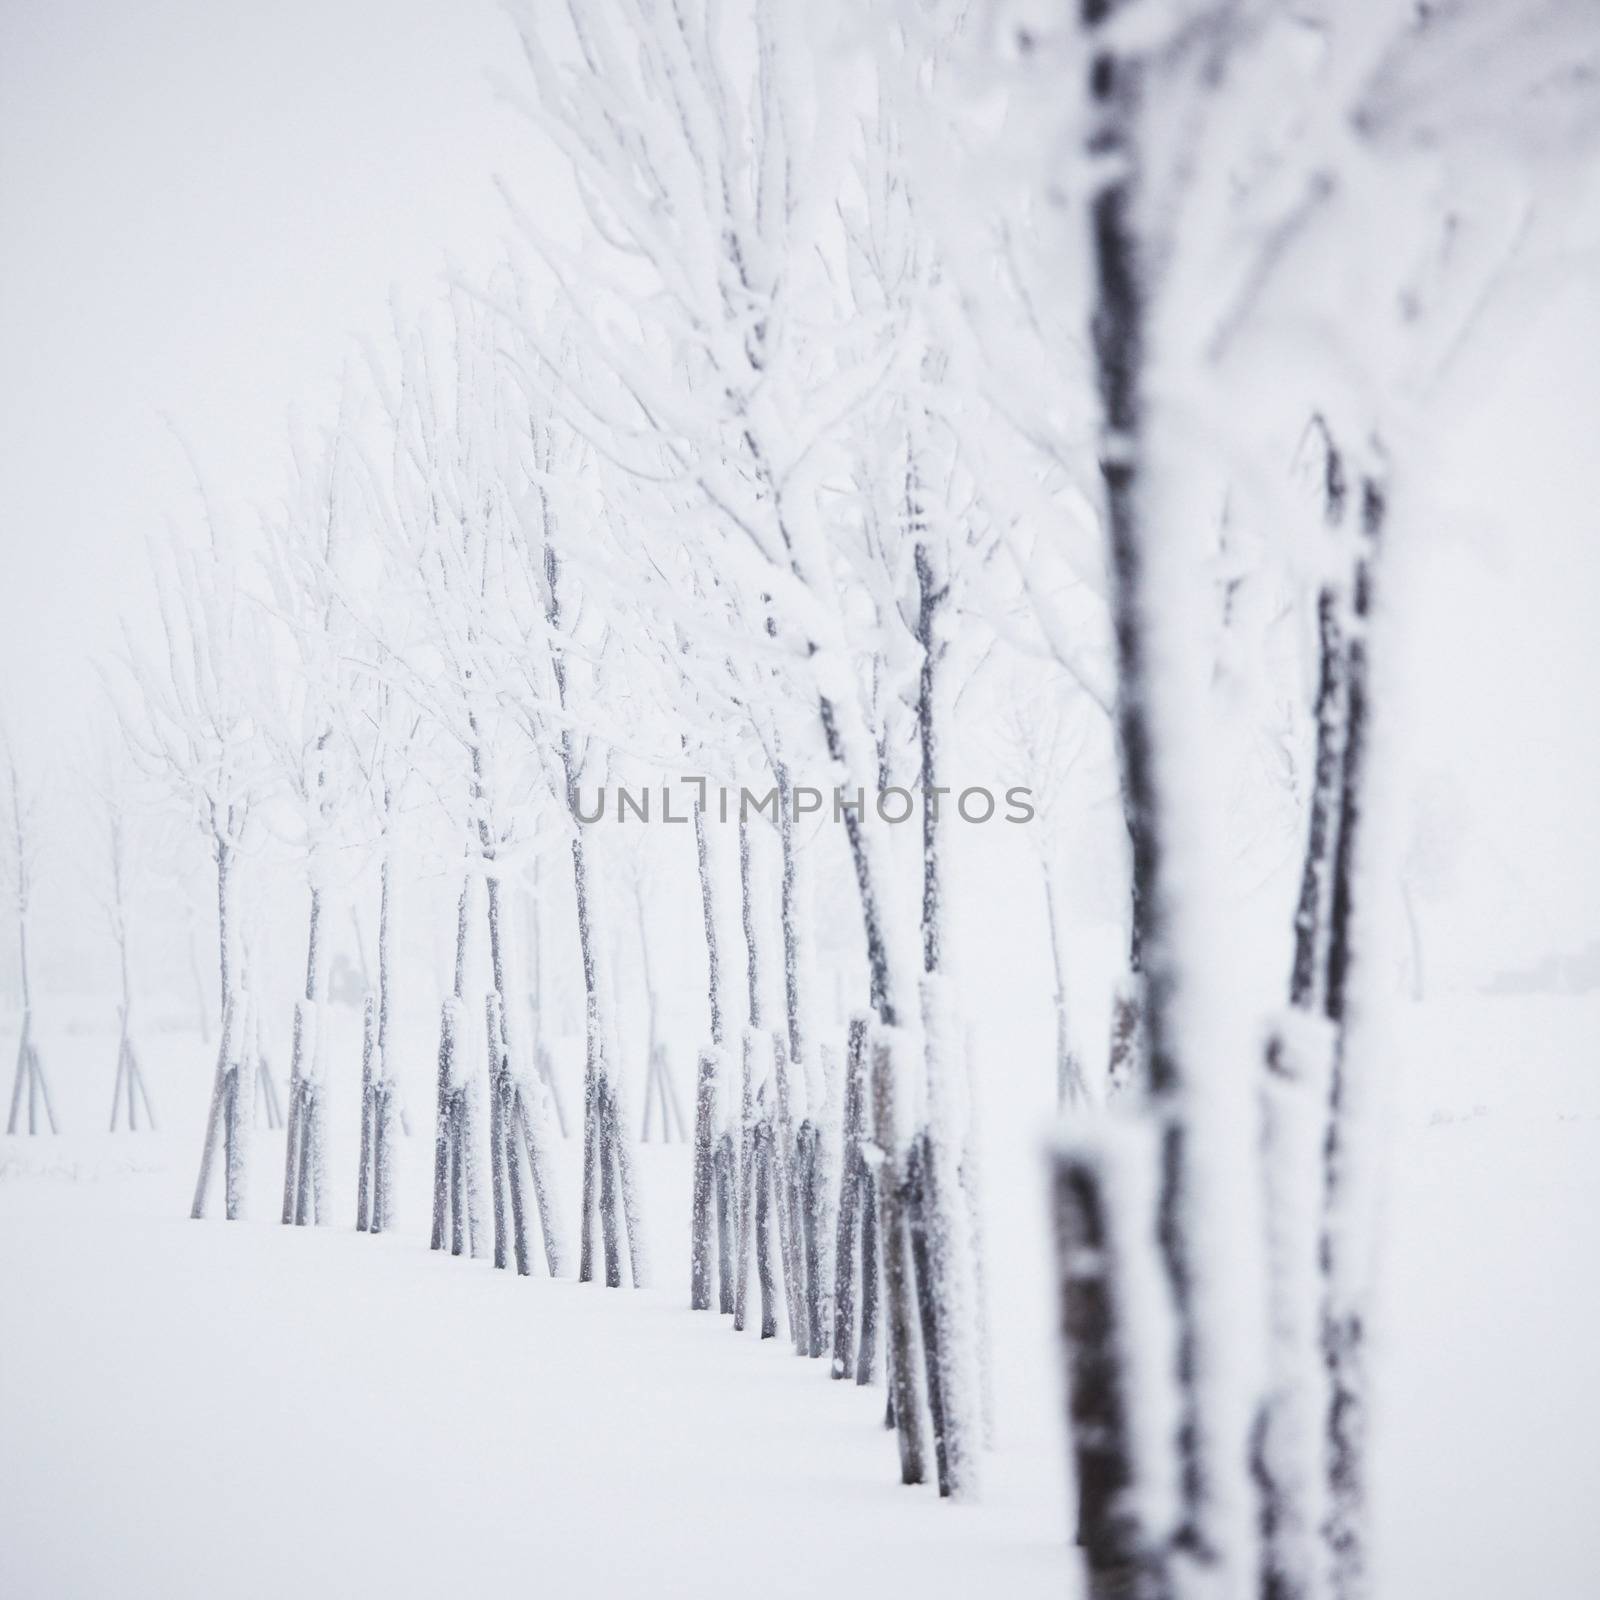 Winter forest with snow  by Yellowj